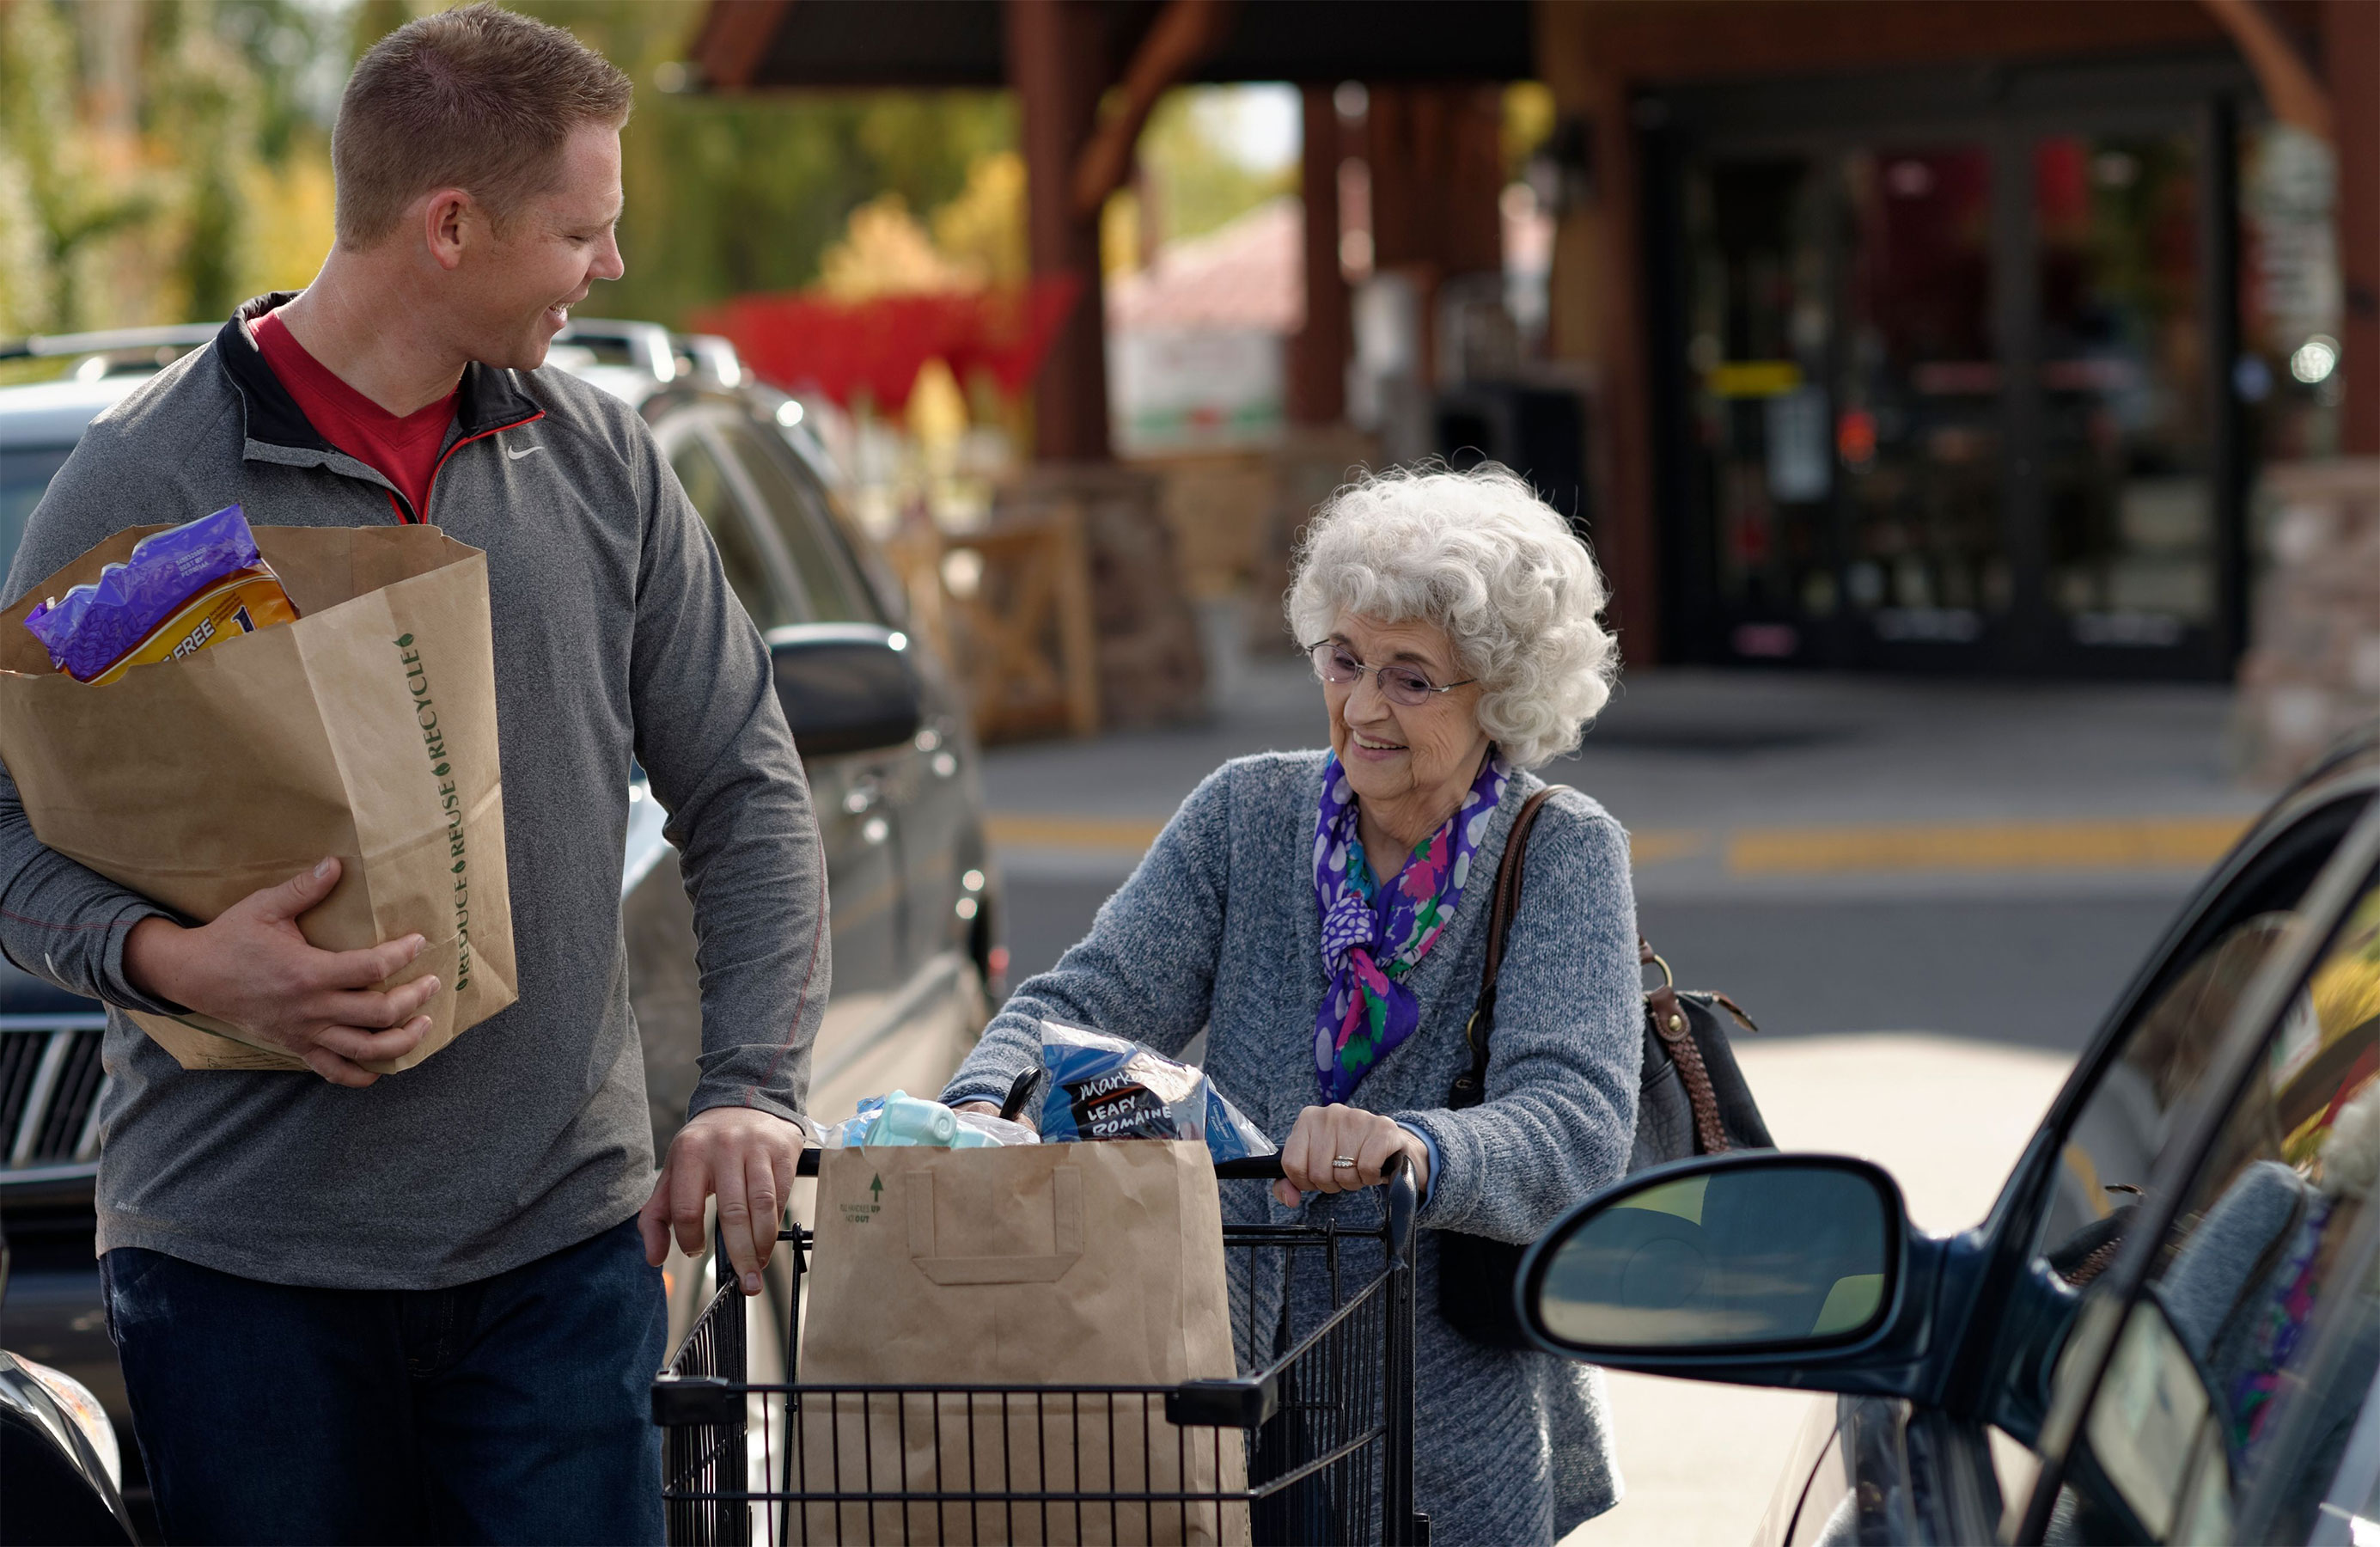 A young man helps an elderly woman carry groceries out to her car.